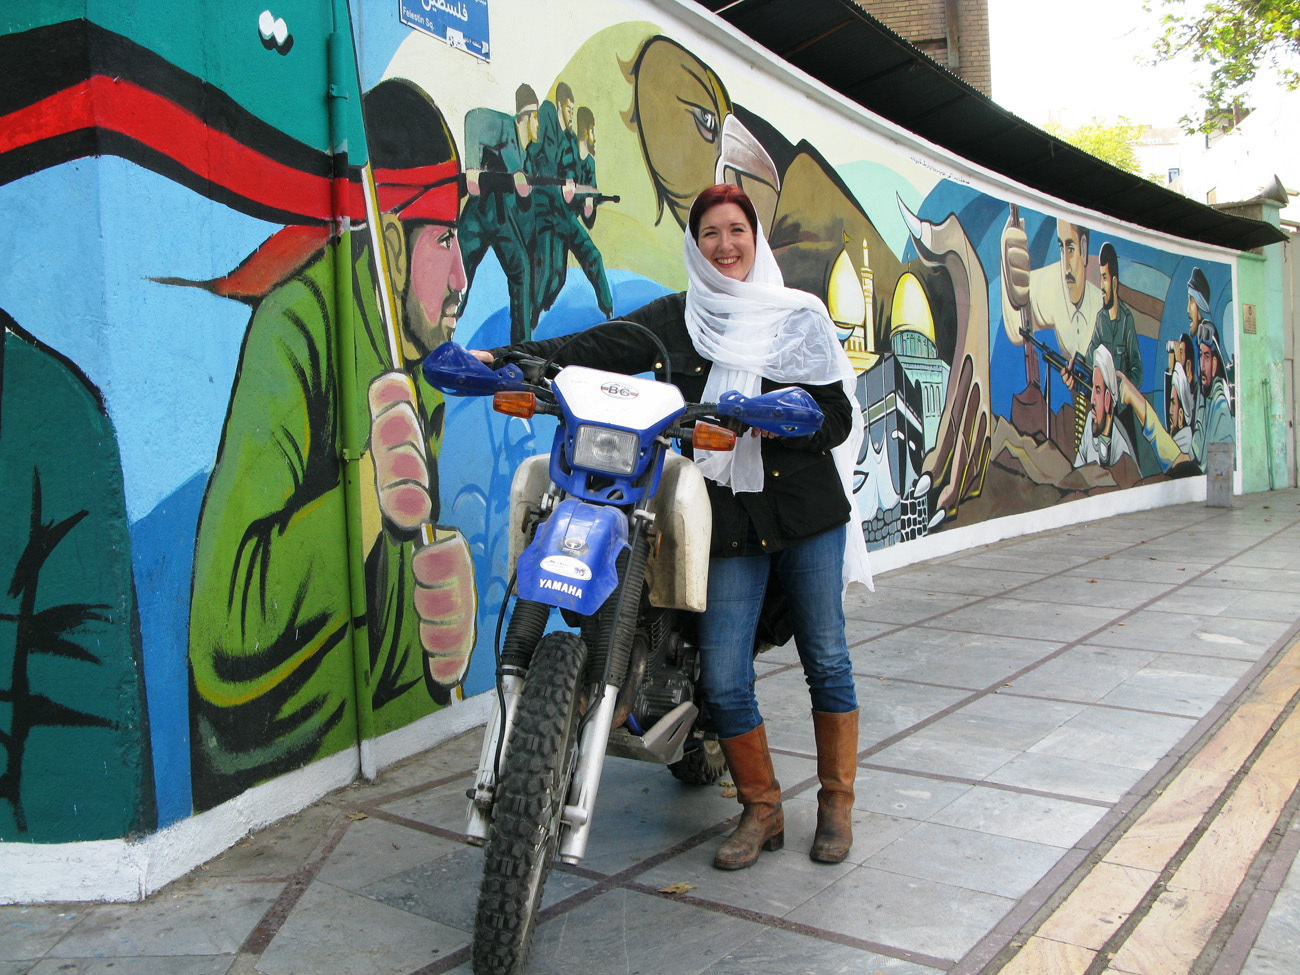 British travel writer Lois Pryce motorcycled 3,000 miles through Iran on her own. A mural on a military compound in Tehran's Felestin Square commemorates "The Imposed War," as the Iran-Iraq war is known locally.